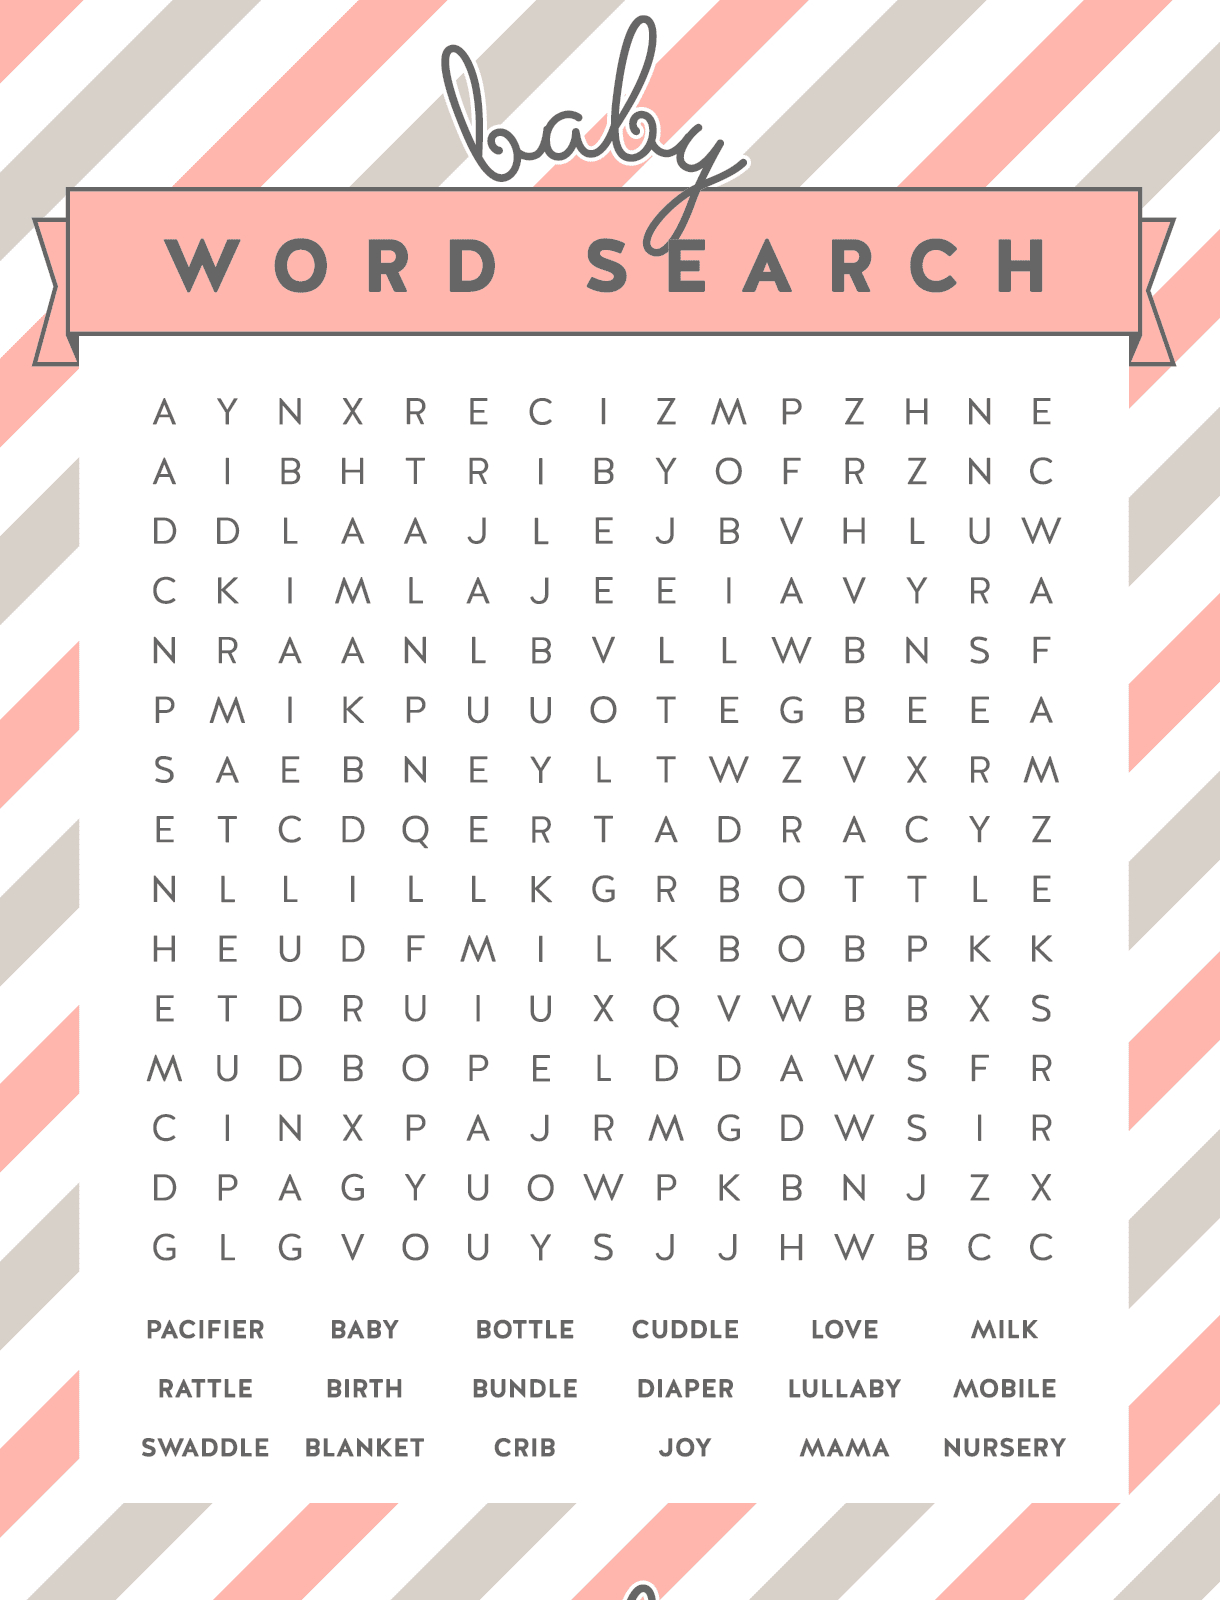 Here Is A List Of 17 Free, Printable Baby Shower Word Search Puzzles - Quick Printable Puzzles